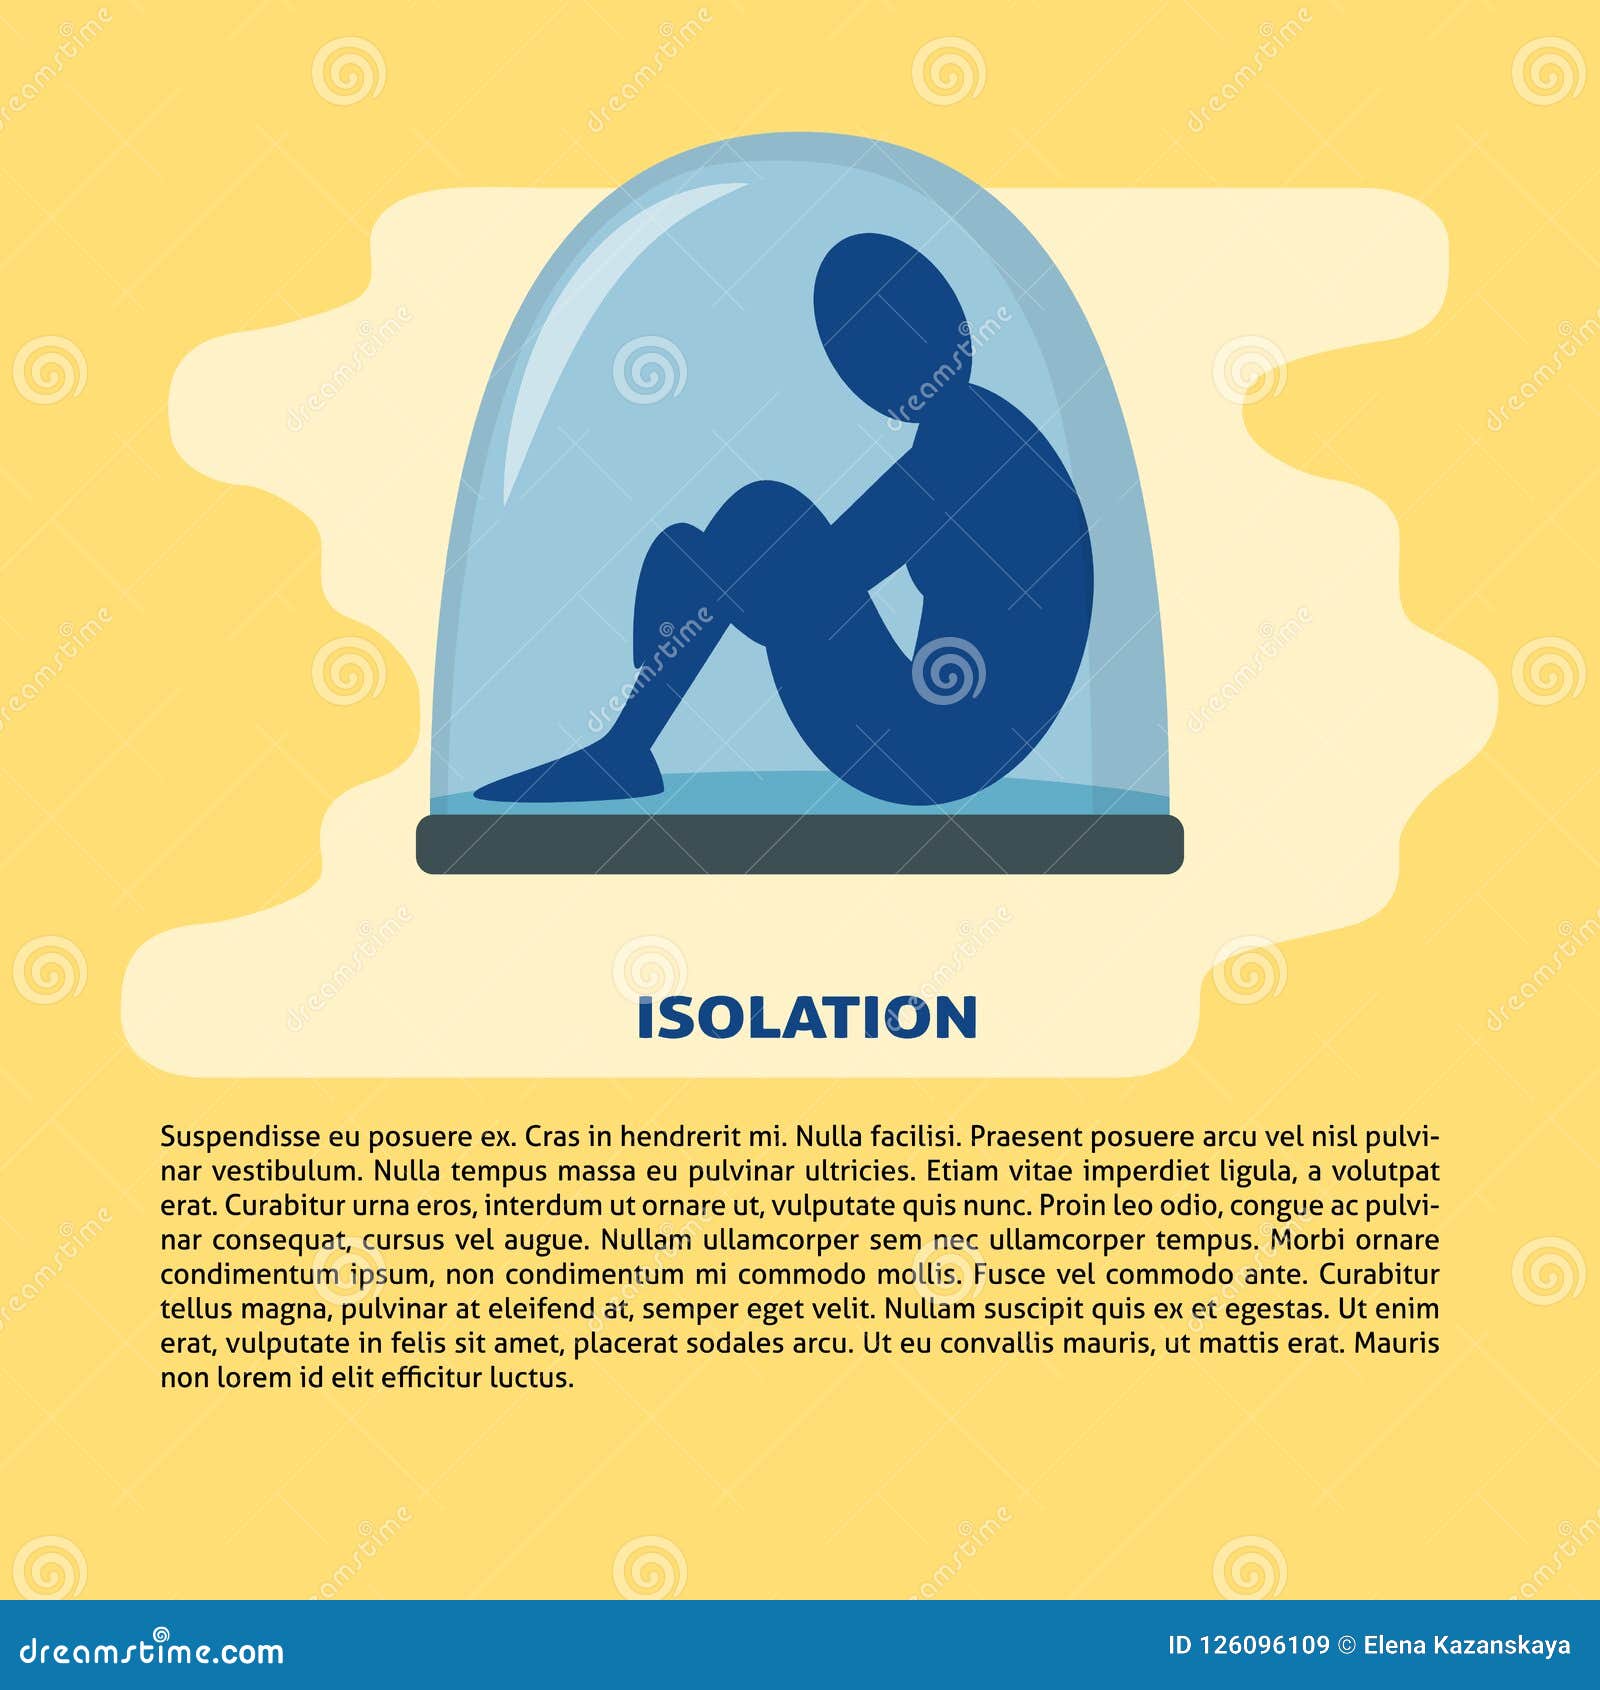  Isolation  Concept Illustration In Flat Style With Text 